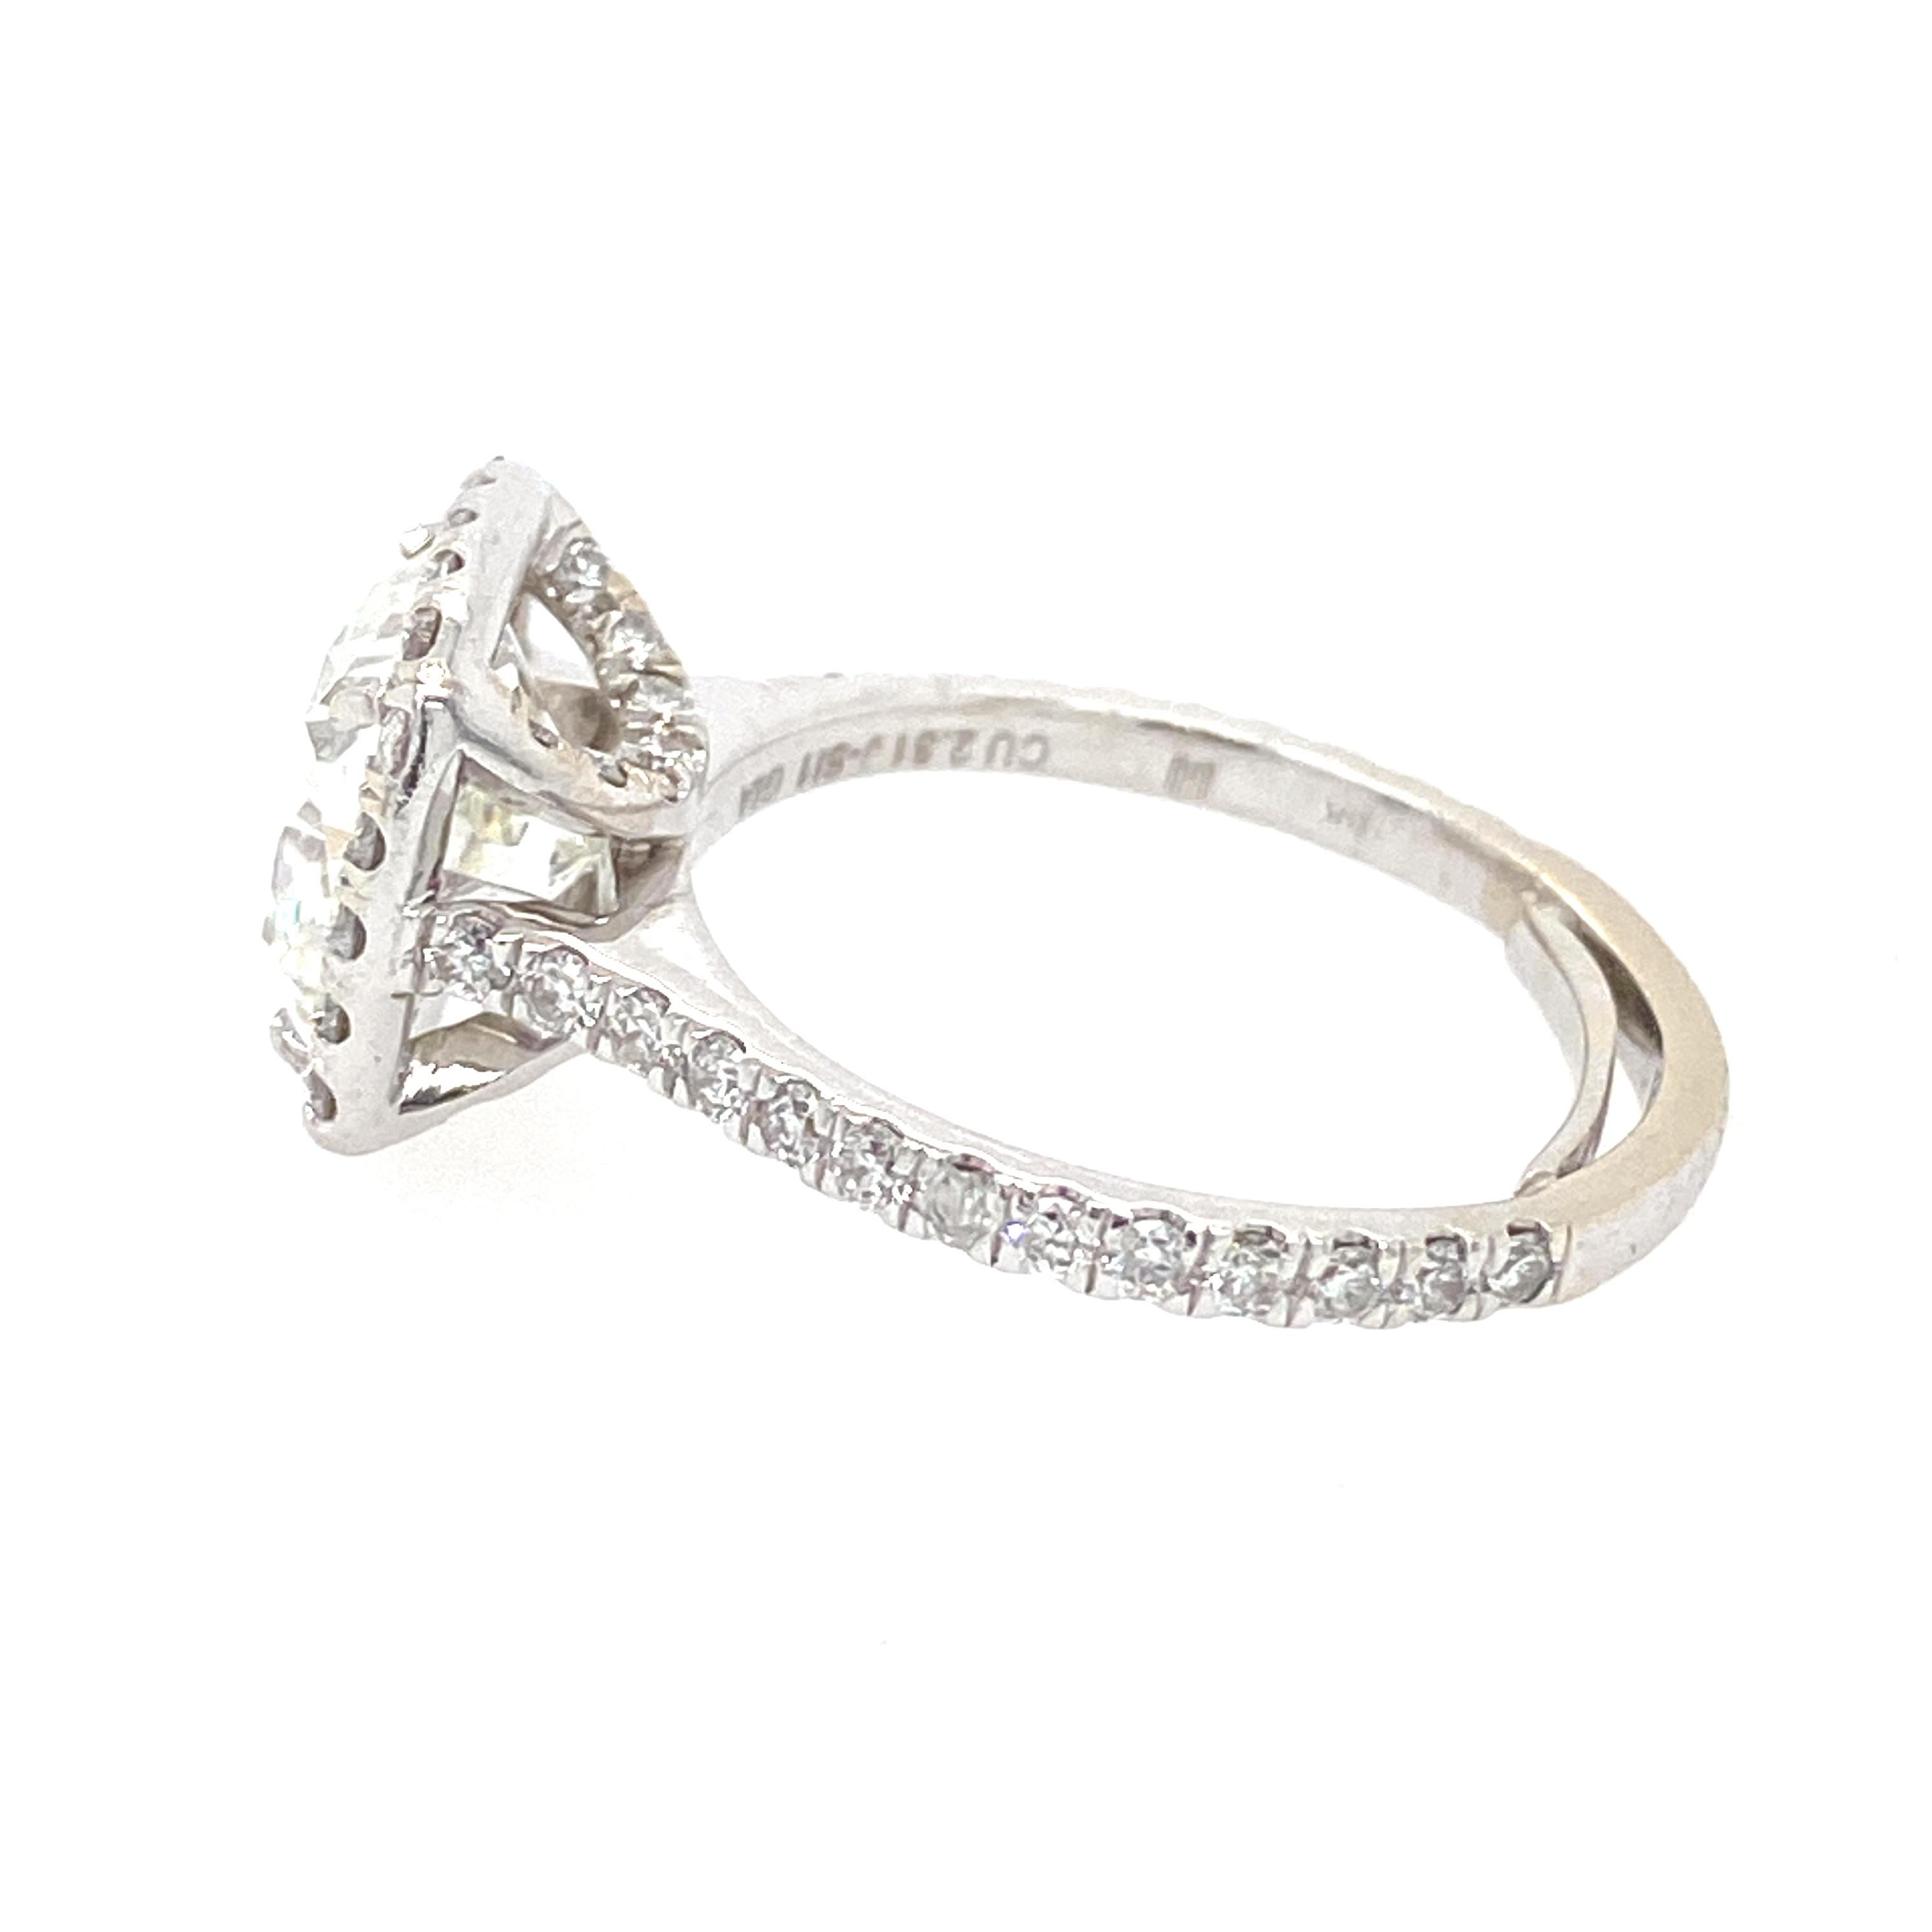 The center diamond is a GIA 2.31 J color SI1 clarity cushion cut. There are .89cts of brilliant cut diamonds around the center stone and down the shank. The ring is in 18K white gold. Ring size 5.5 and can be sized. 